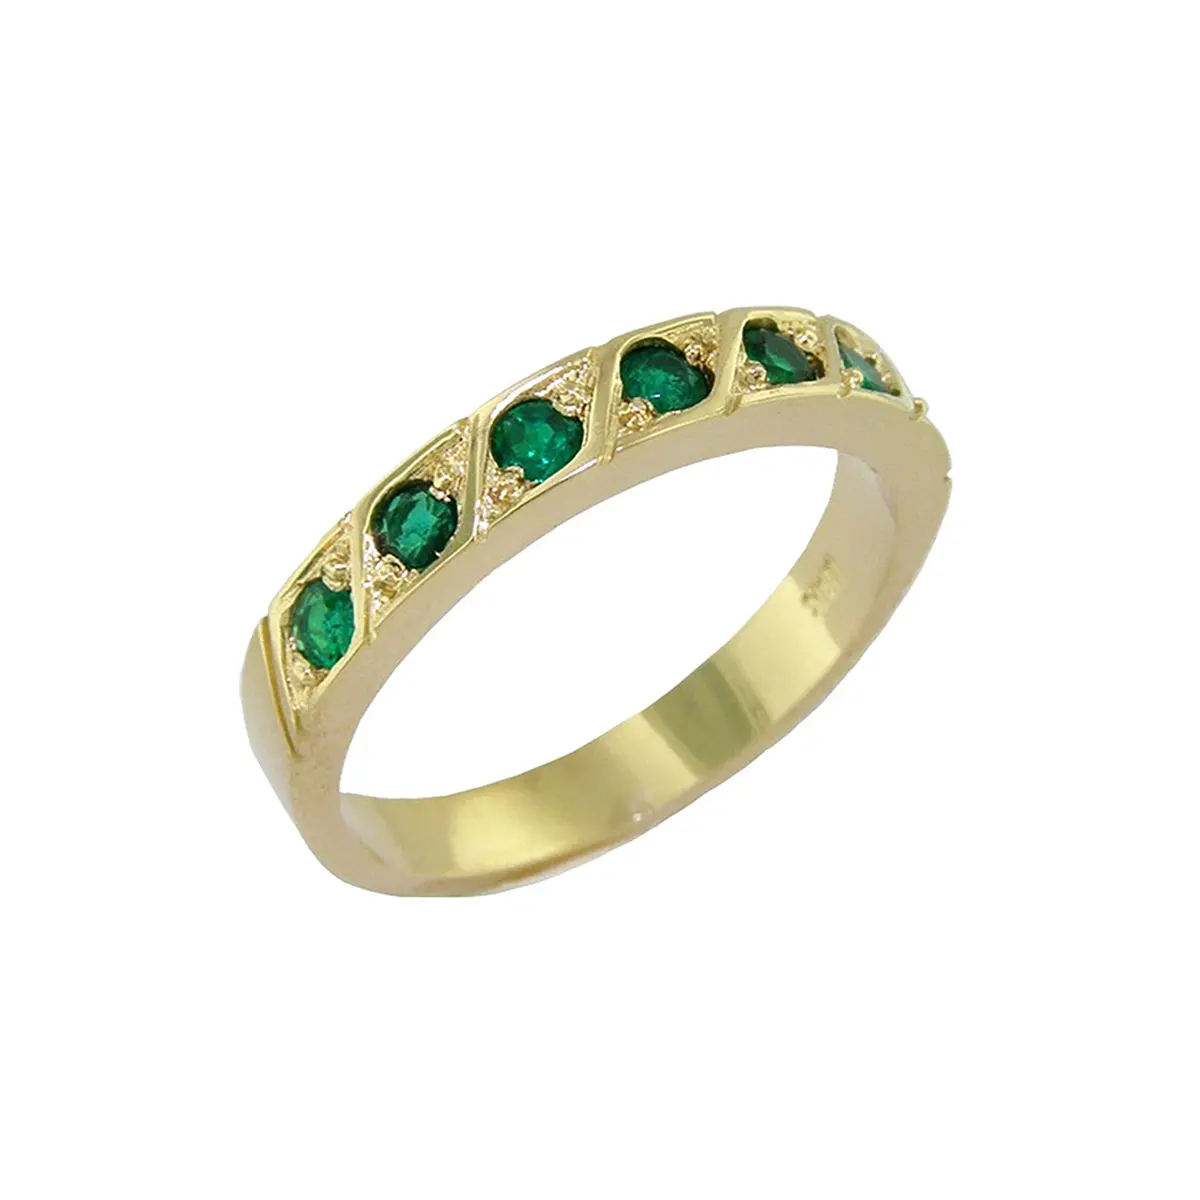 Antique Style Round Emerald Wedding Band in 18K Yellow Gold